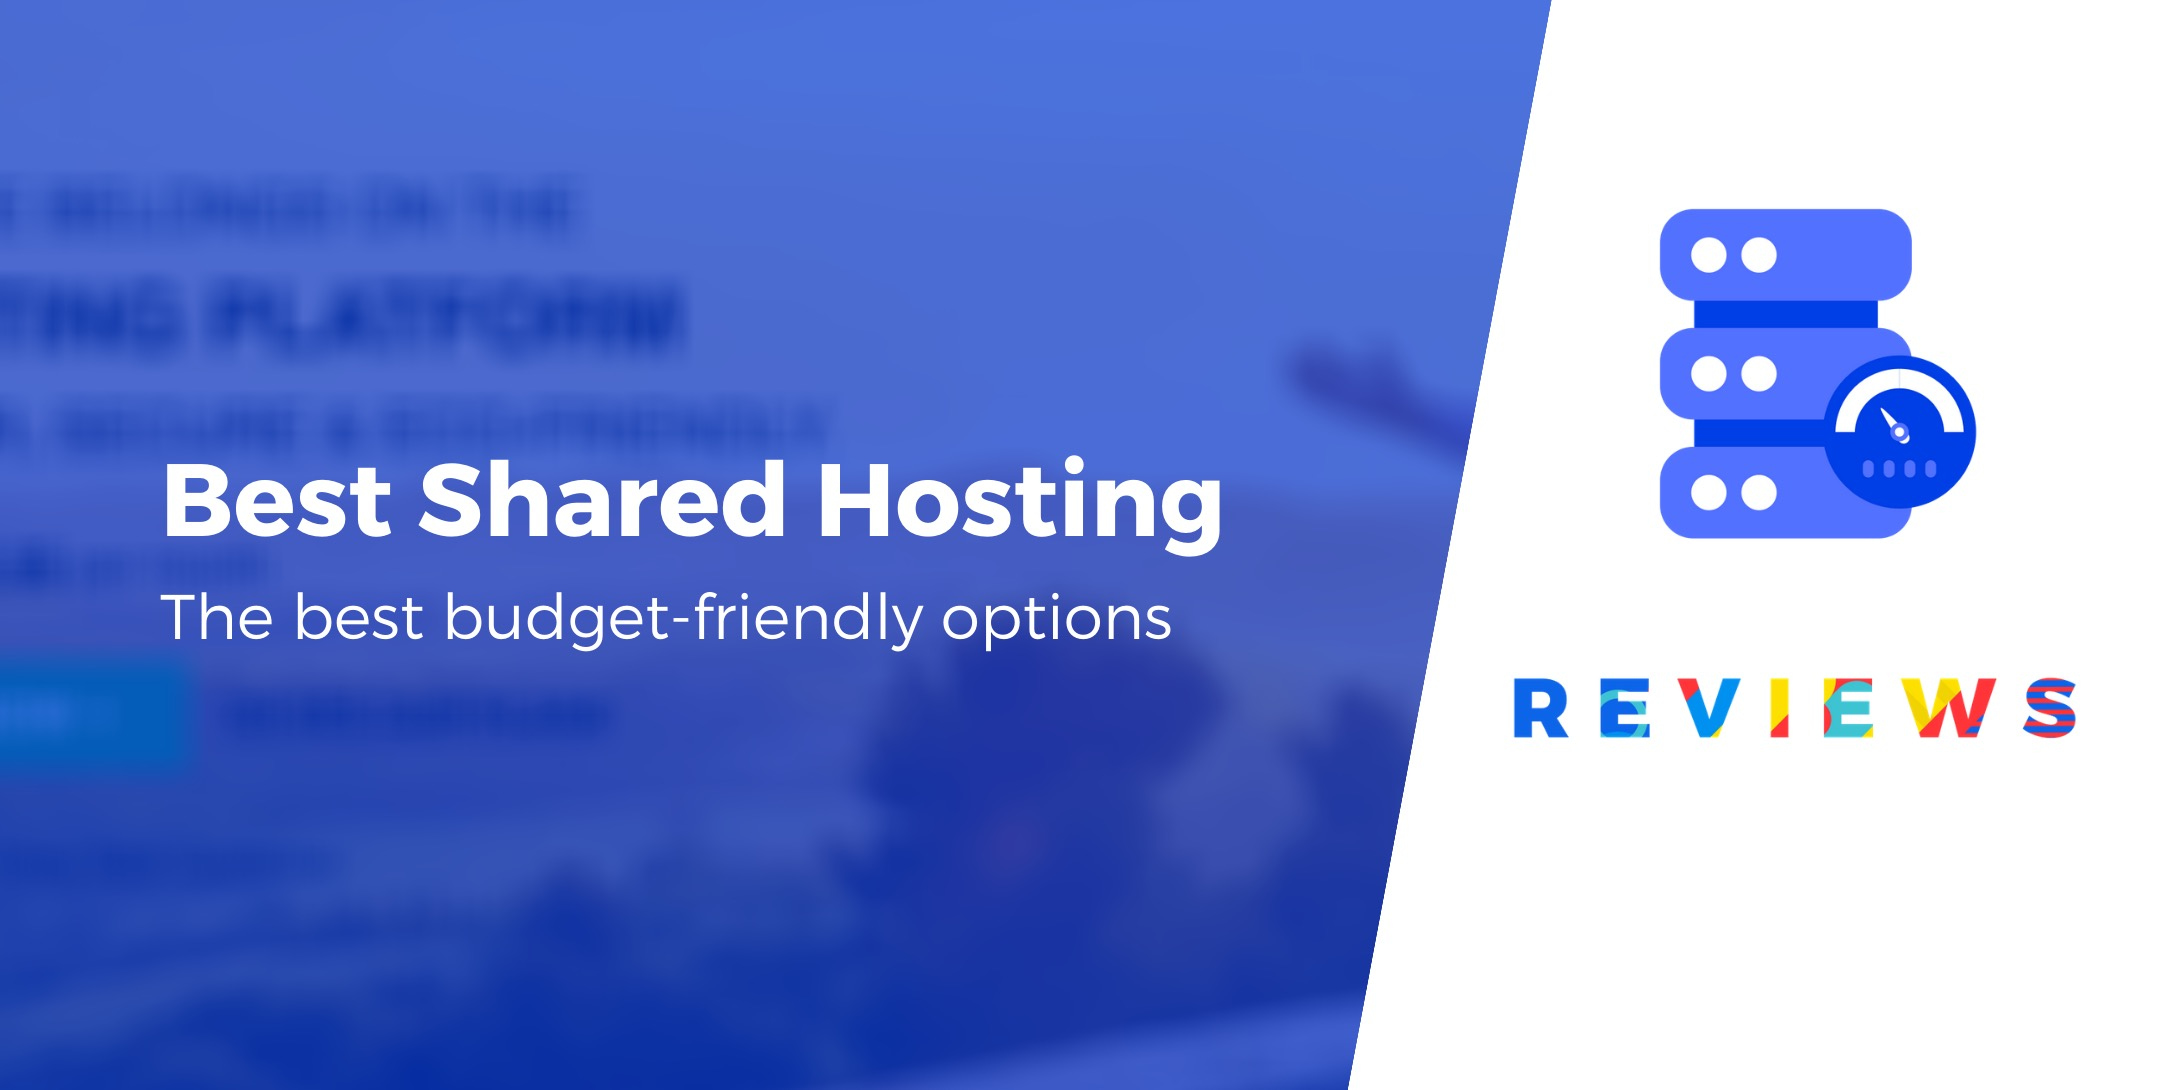 What Are the Best Shared Hosting Plans?